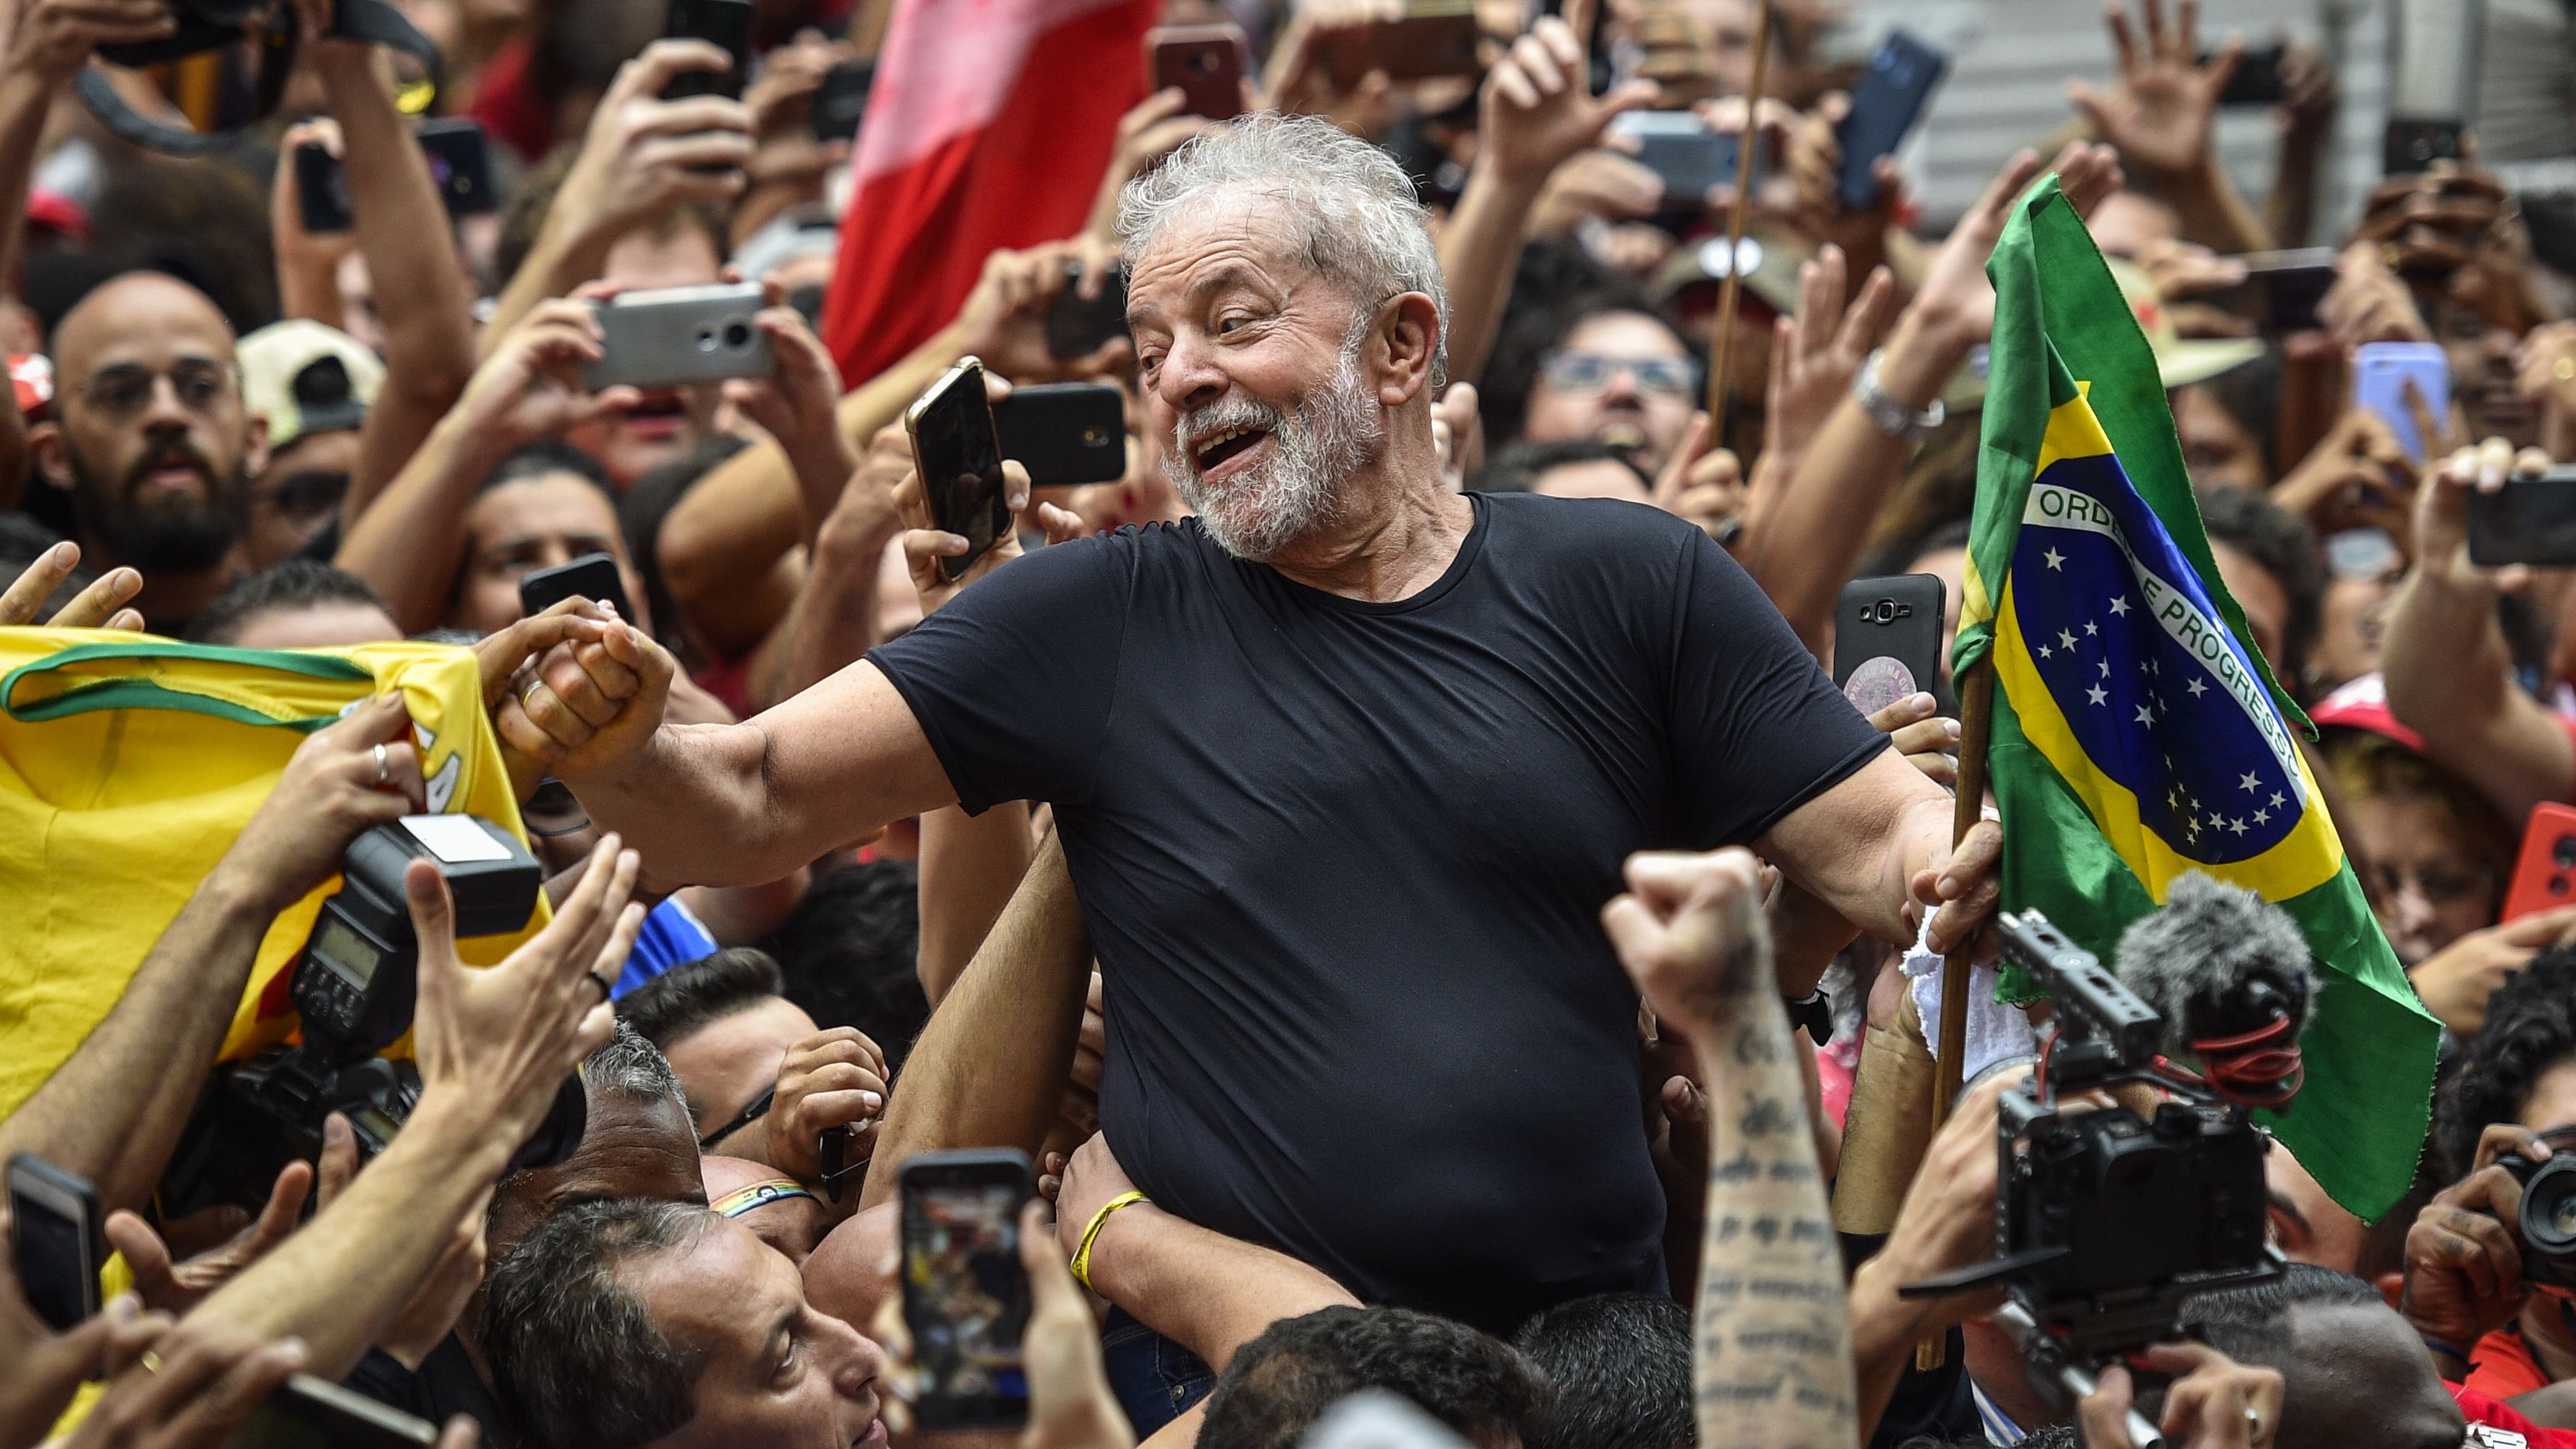 Former president Luis Inacio Lula da Silva, commonly known as Lula, will take on Bolsonaro in the October elections.